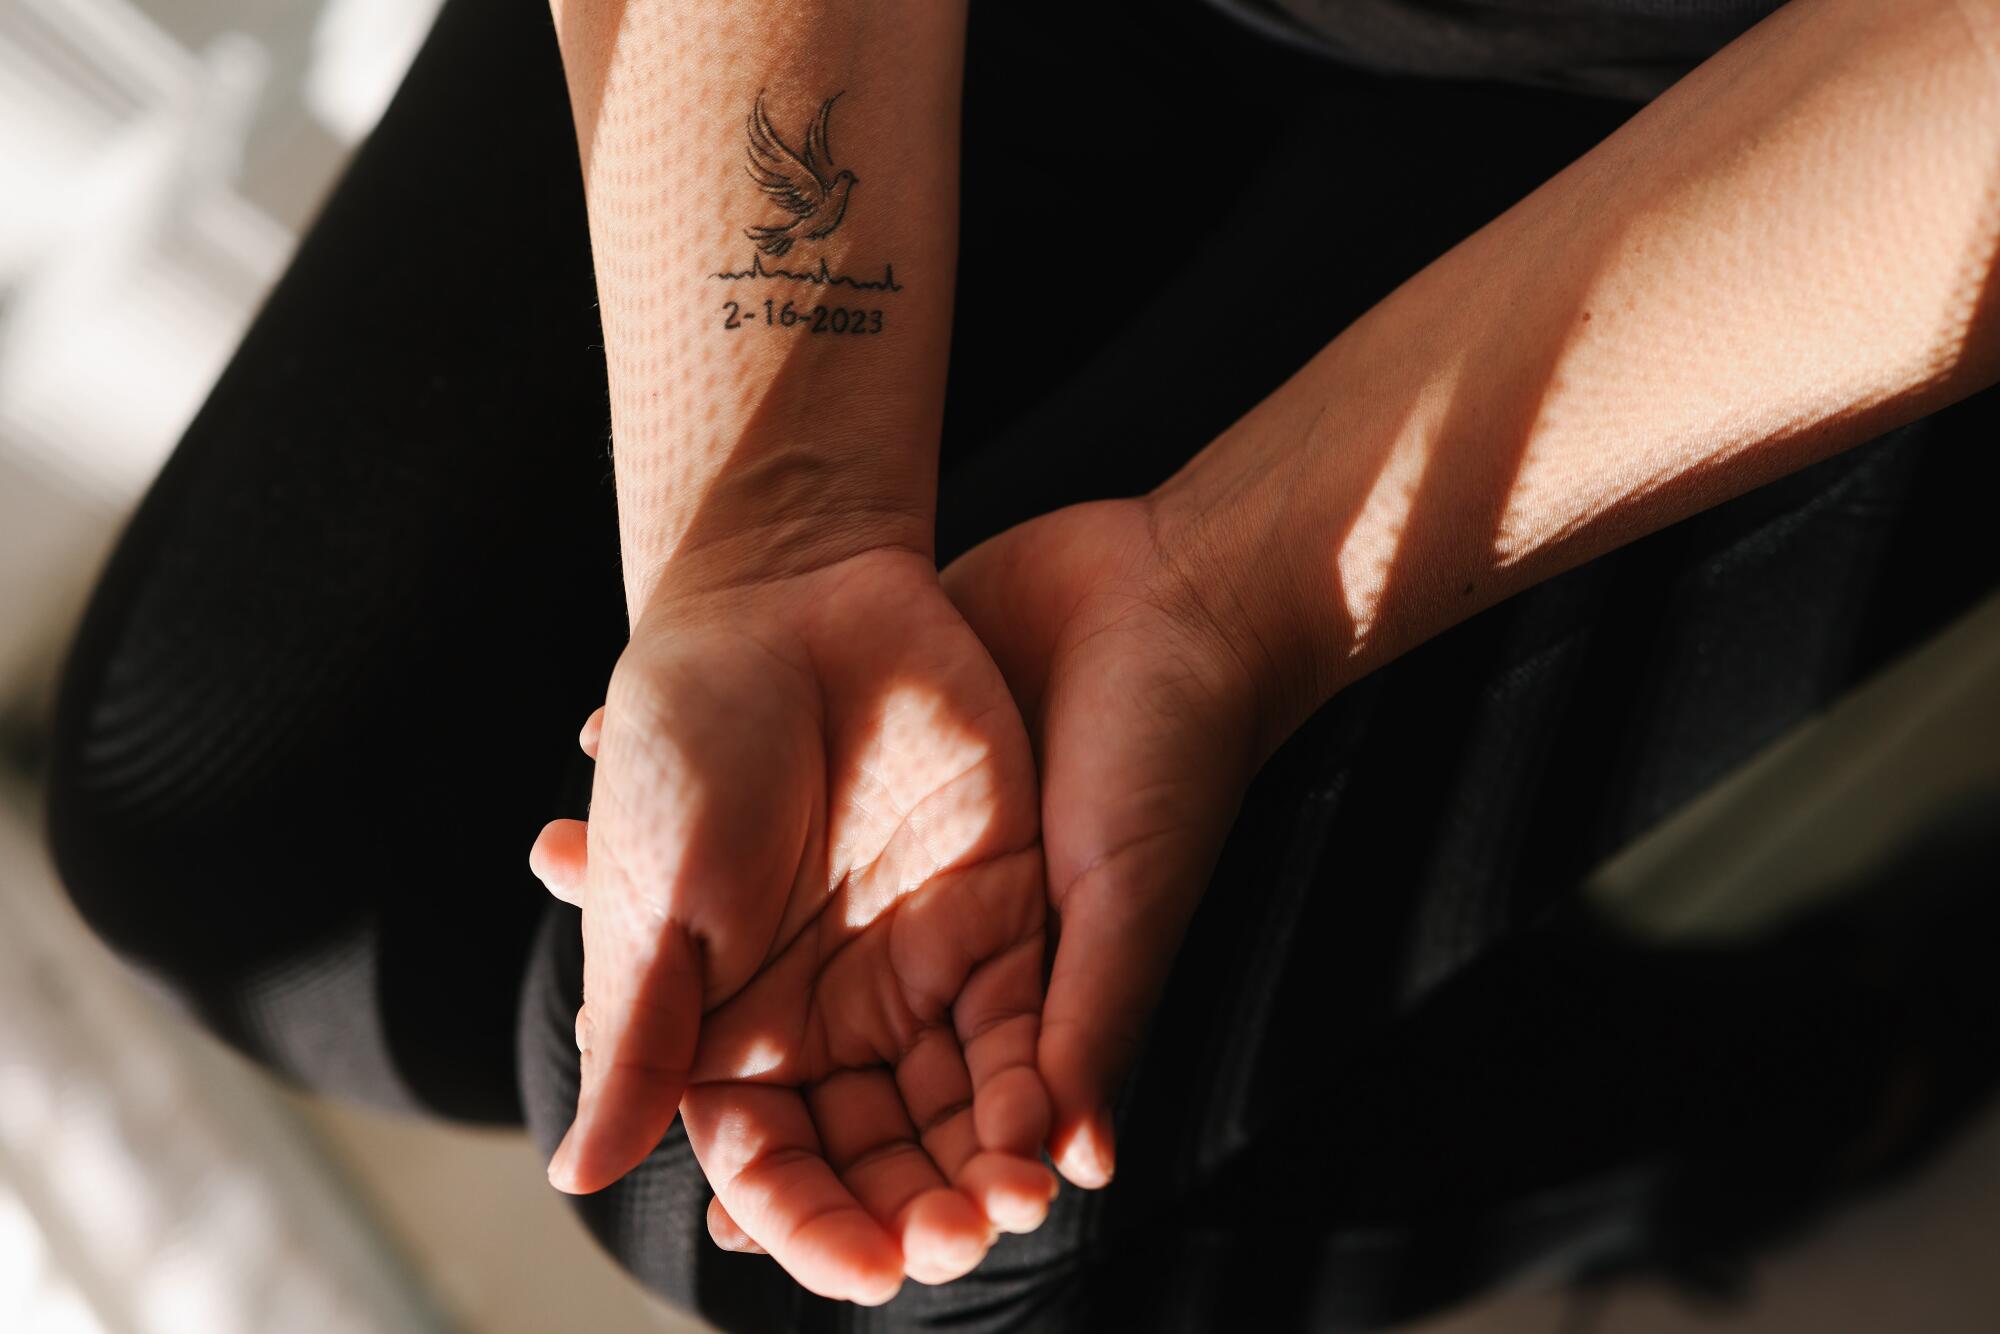 A woman shows a tattoo on the inside of her forearm.